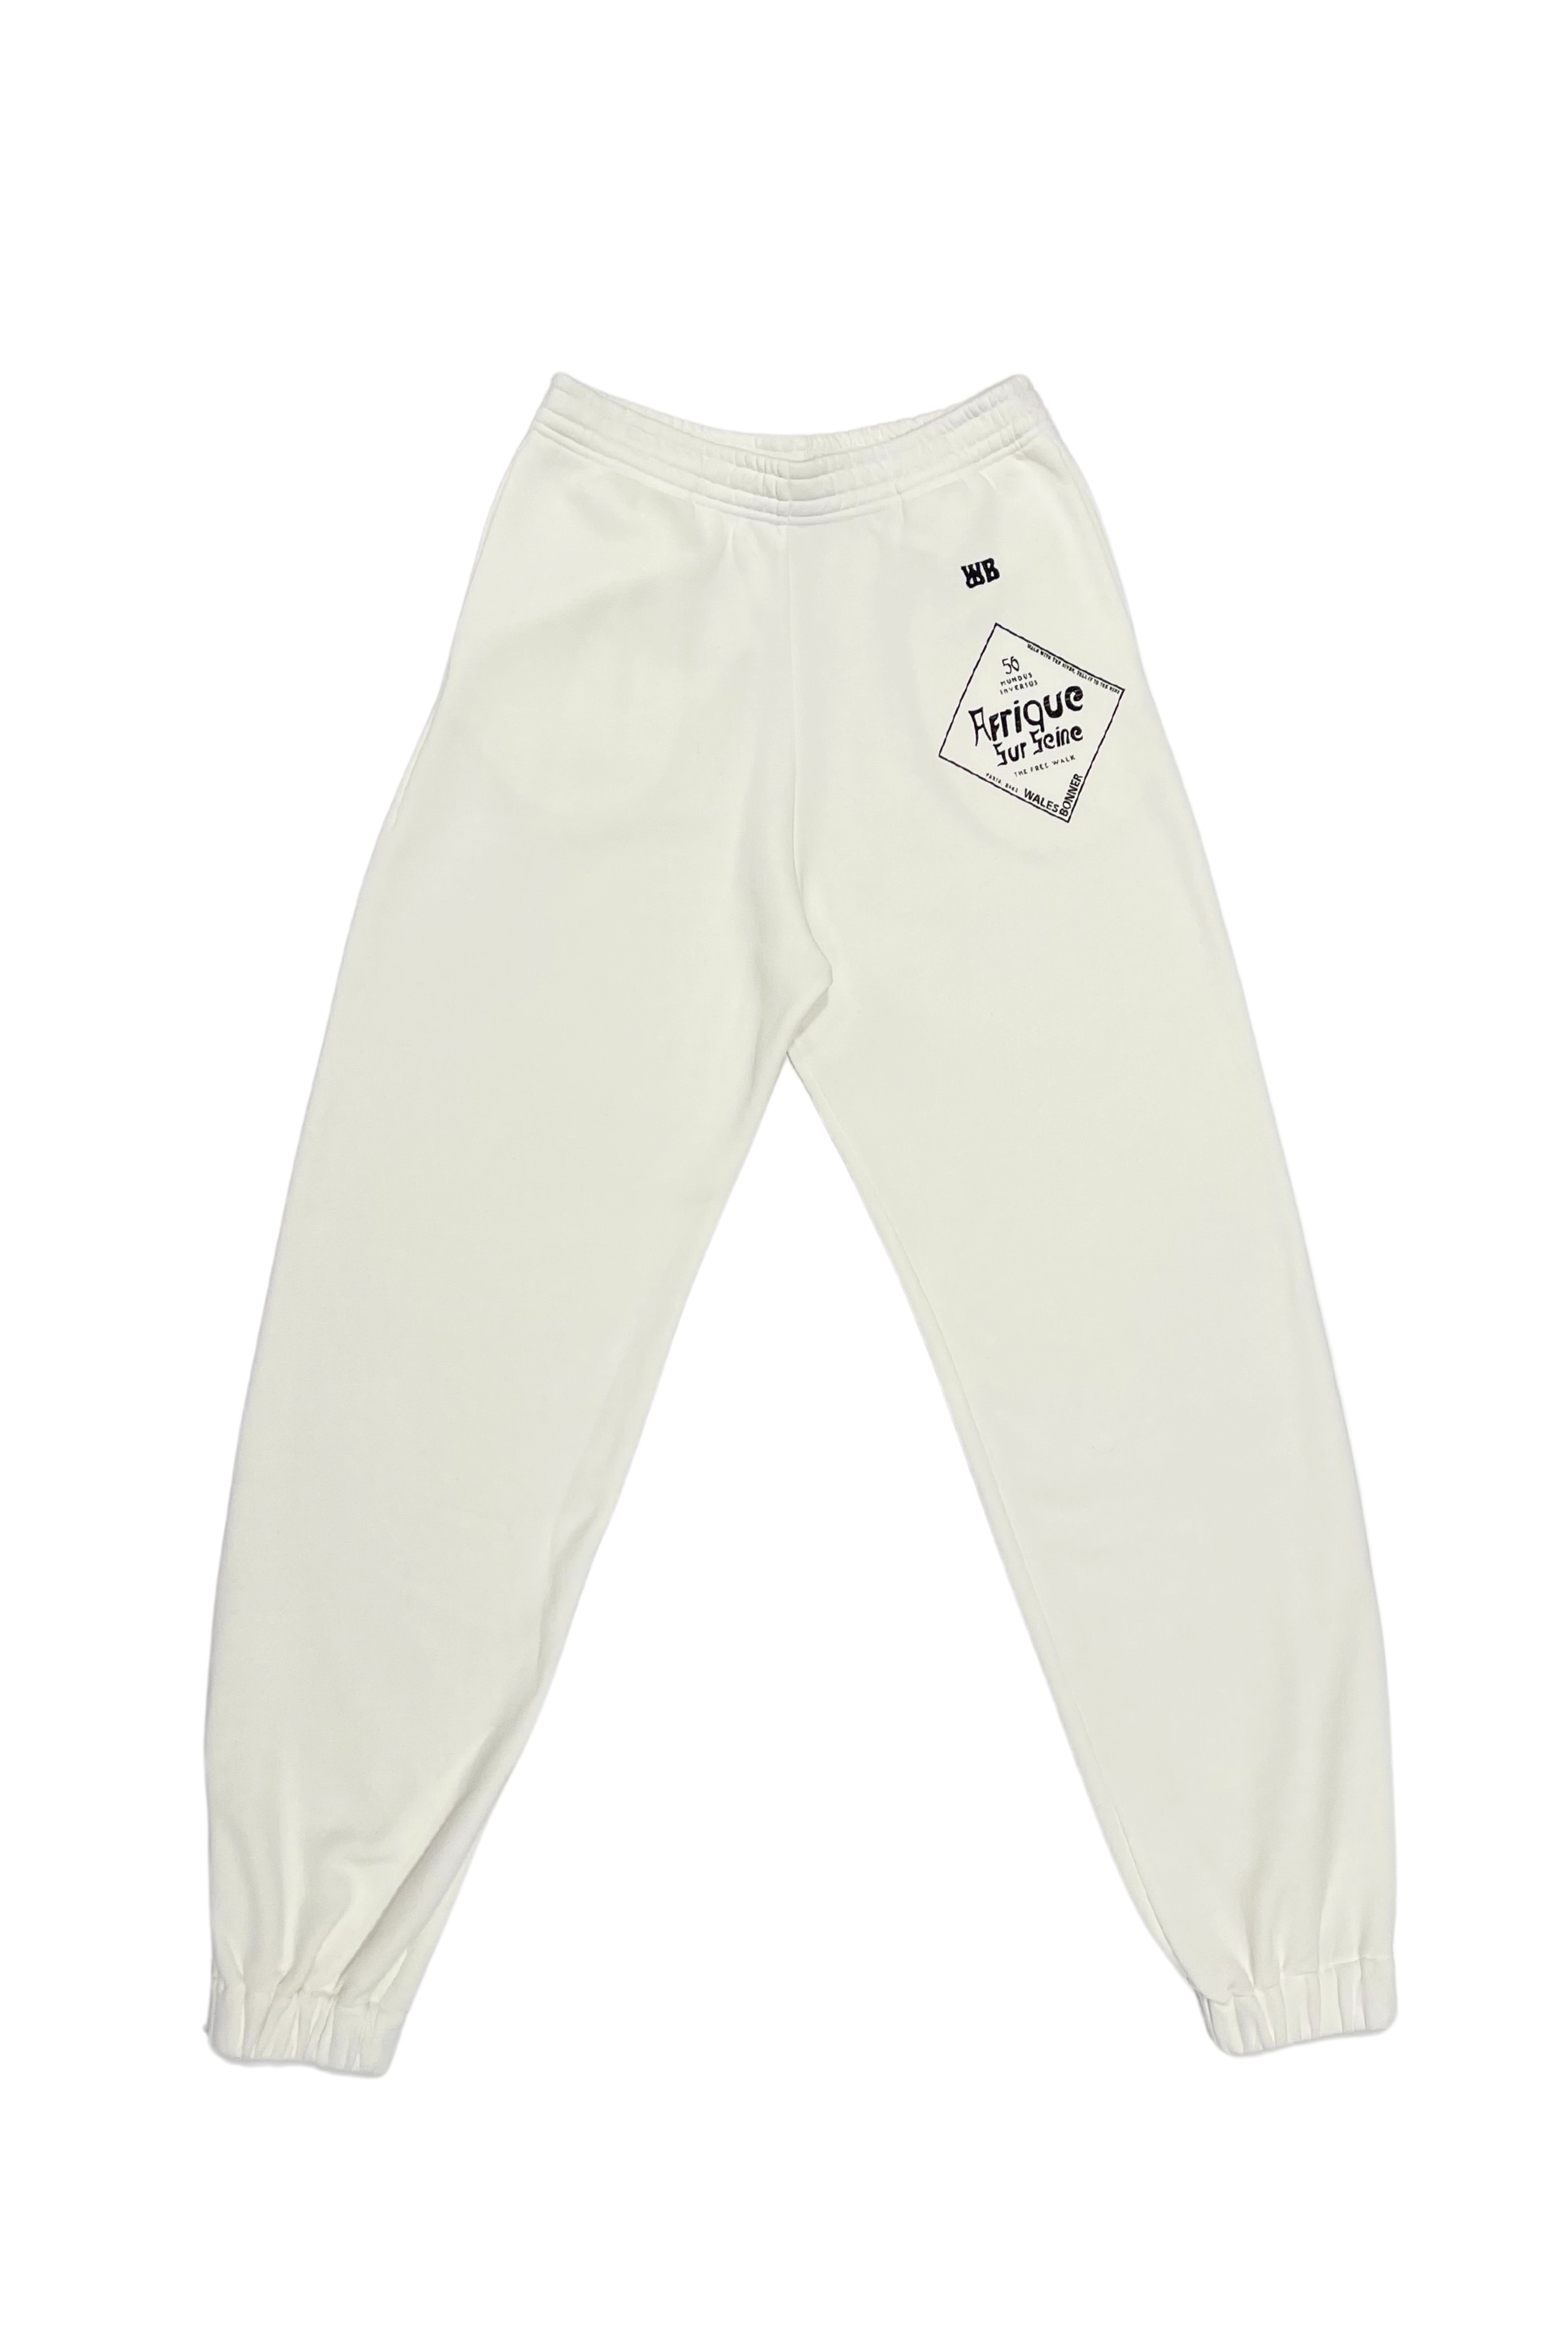 WALES BONNER Wander Track Pant in Ivory